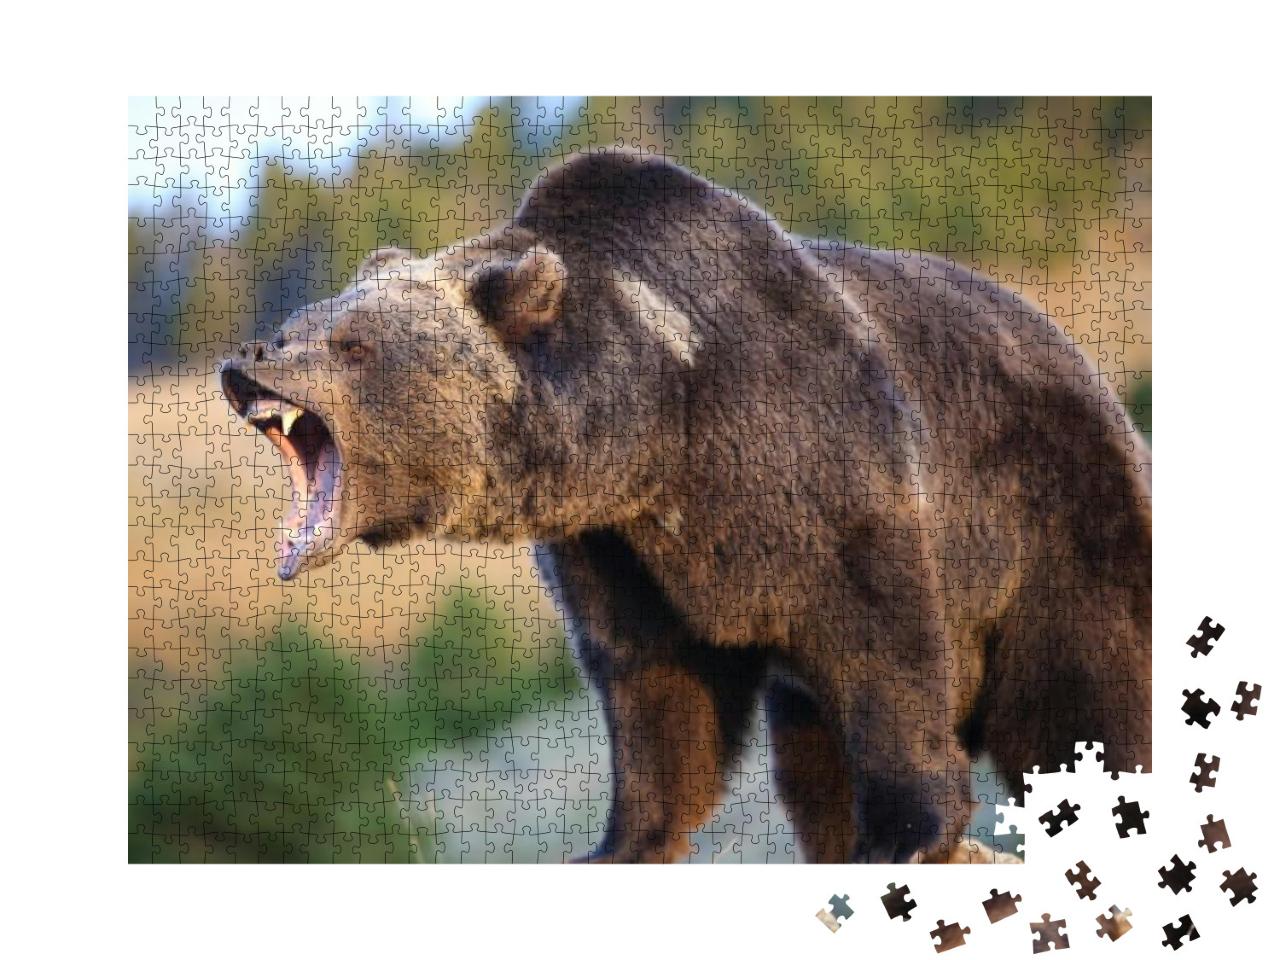 North American Brown Bear Grizzly Growling... Jigsaw Puzzle with 1000 pieces